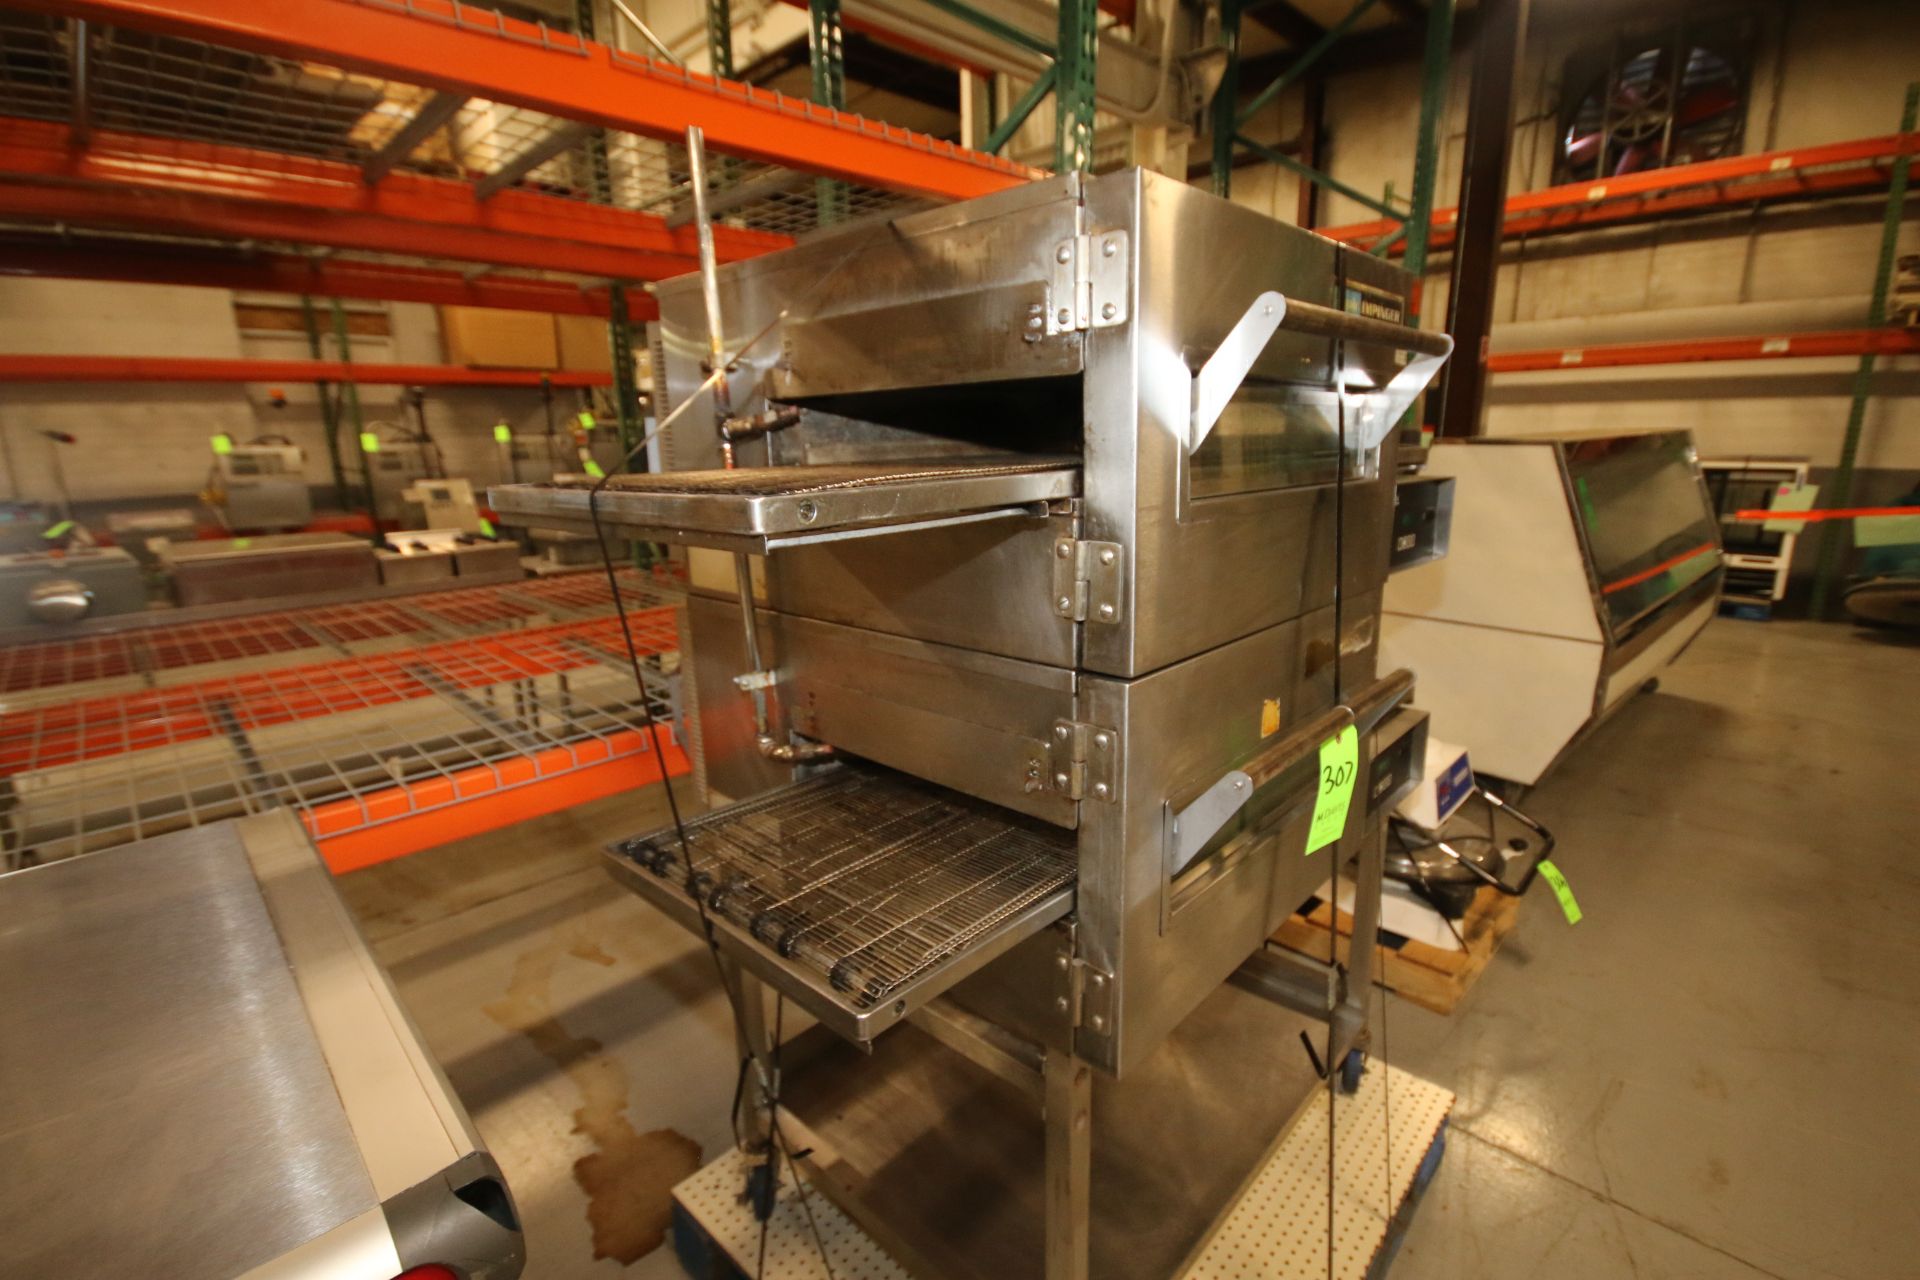 Lincoln Impinger Double Stack Conveyor Pizza Oven with Aprox. 53" L x 18" W x 3-1/4" W Product - Image 3 of 3